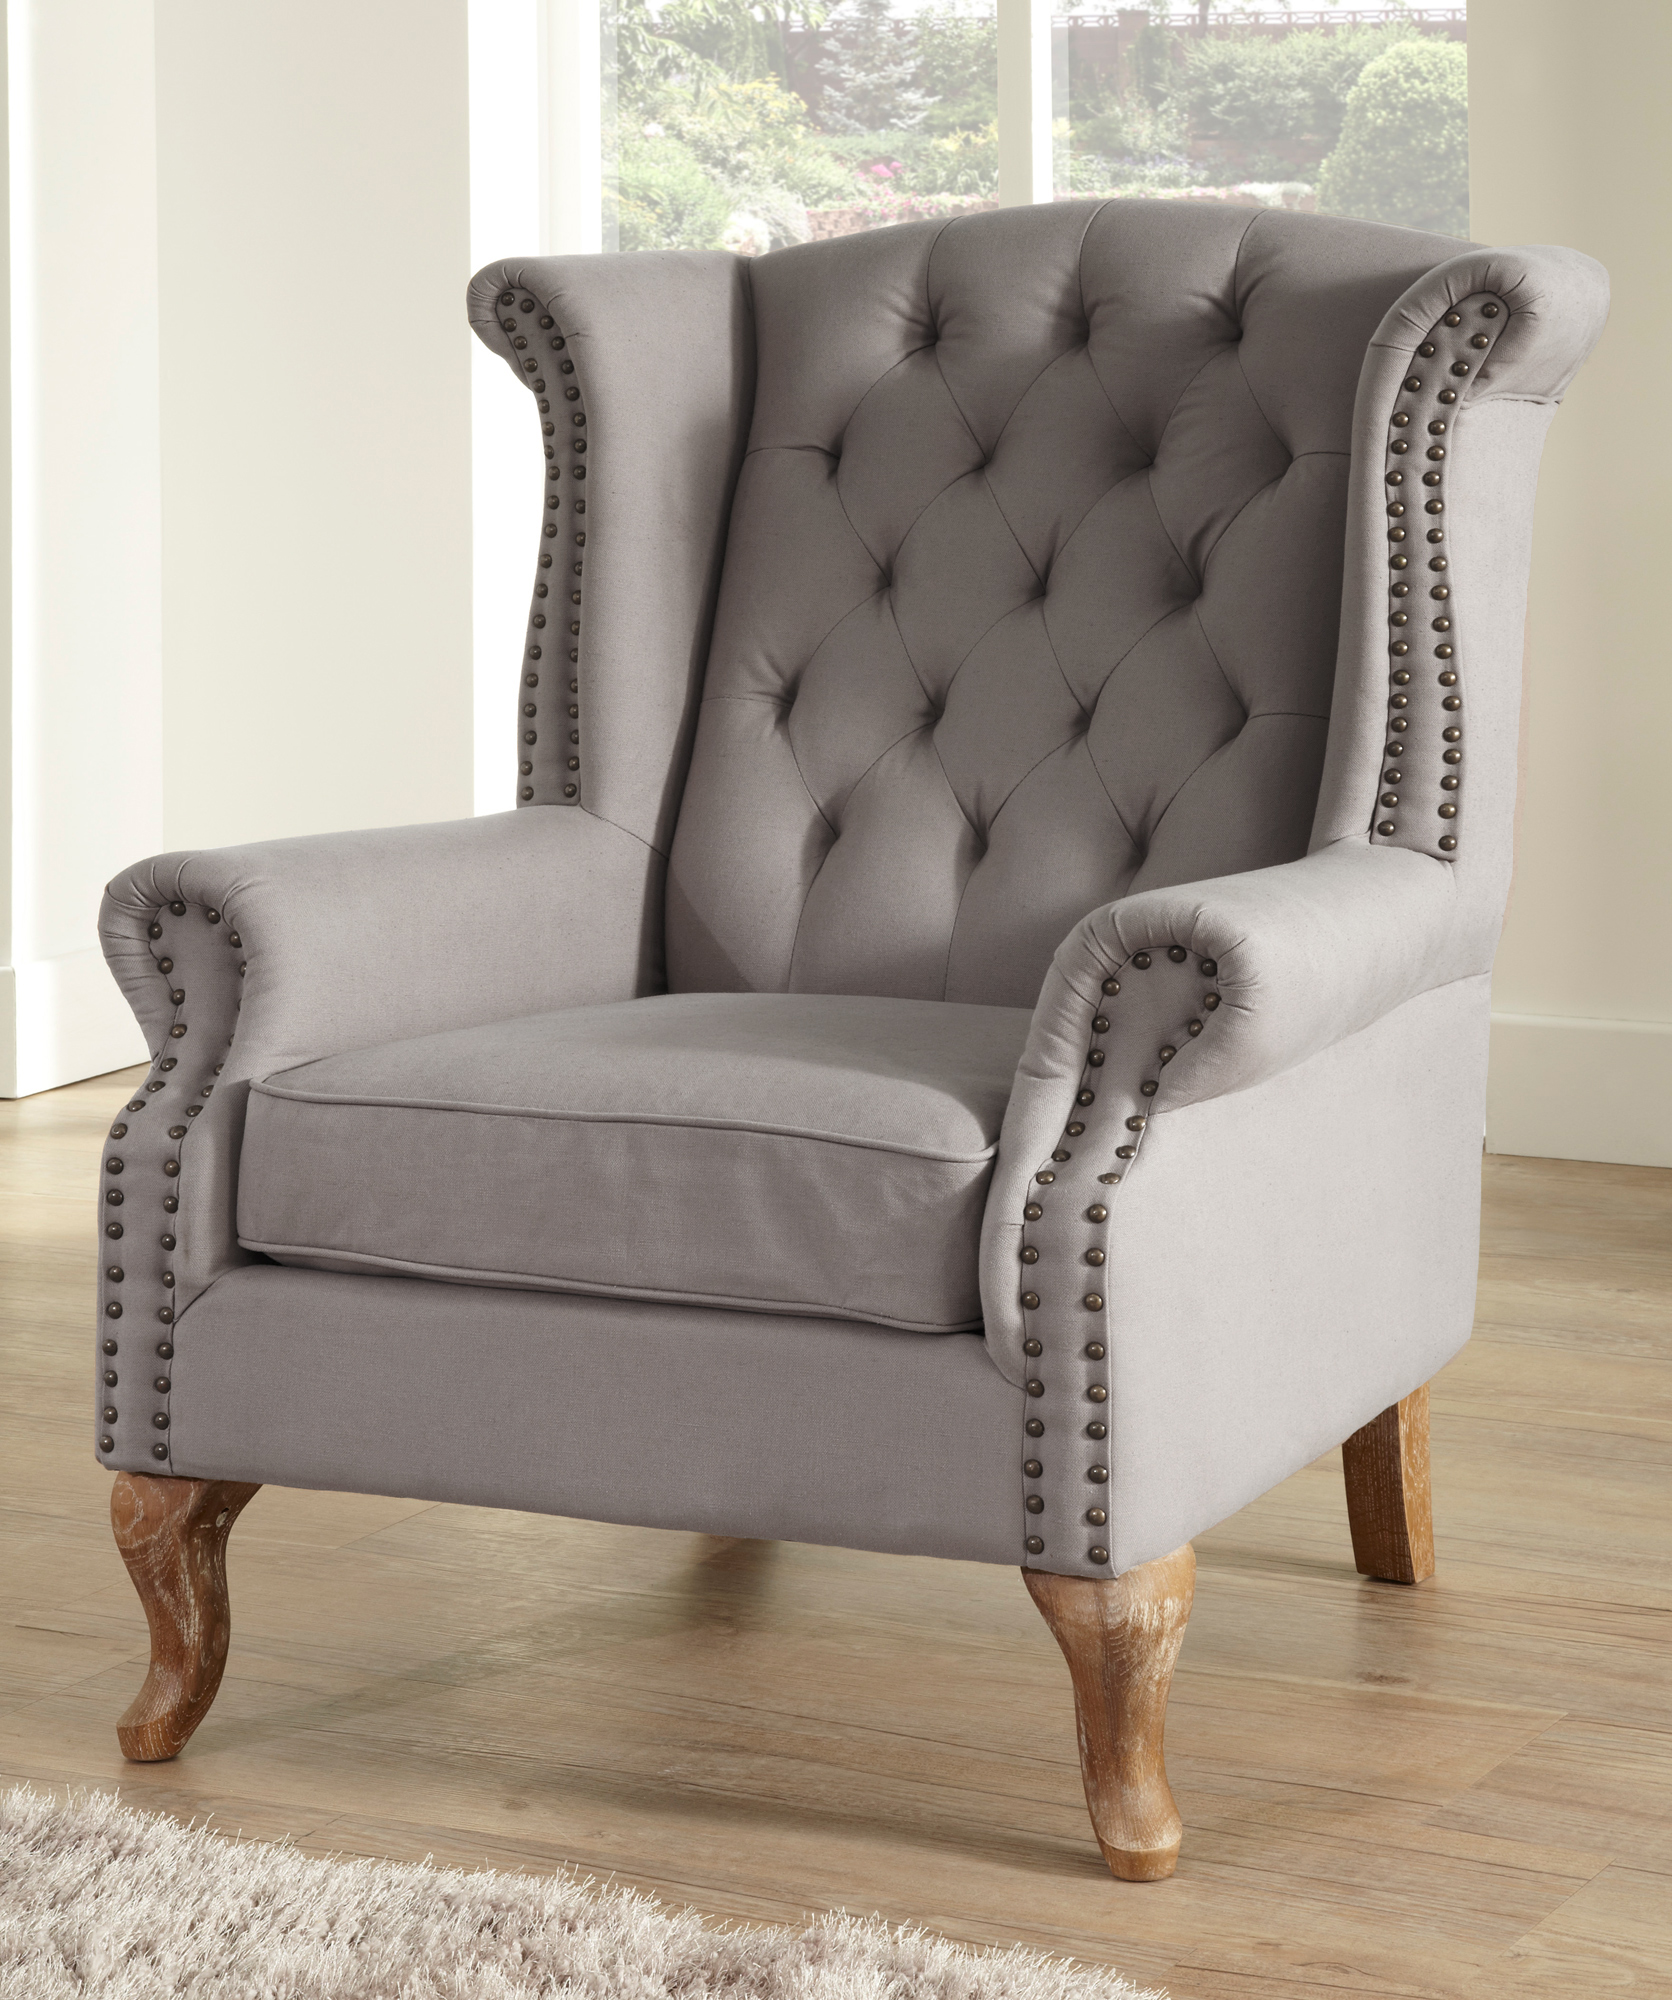 MAYFAIR CHESTERFIELD WINGBACK STONEWASHED LINEN CHAIR (DOVE GREY) | eBay